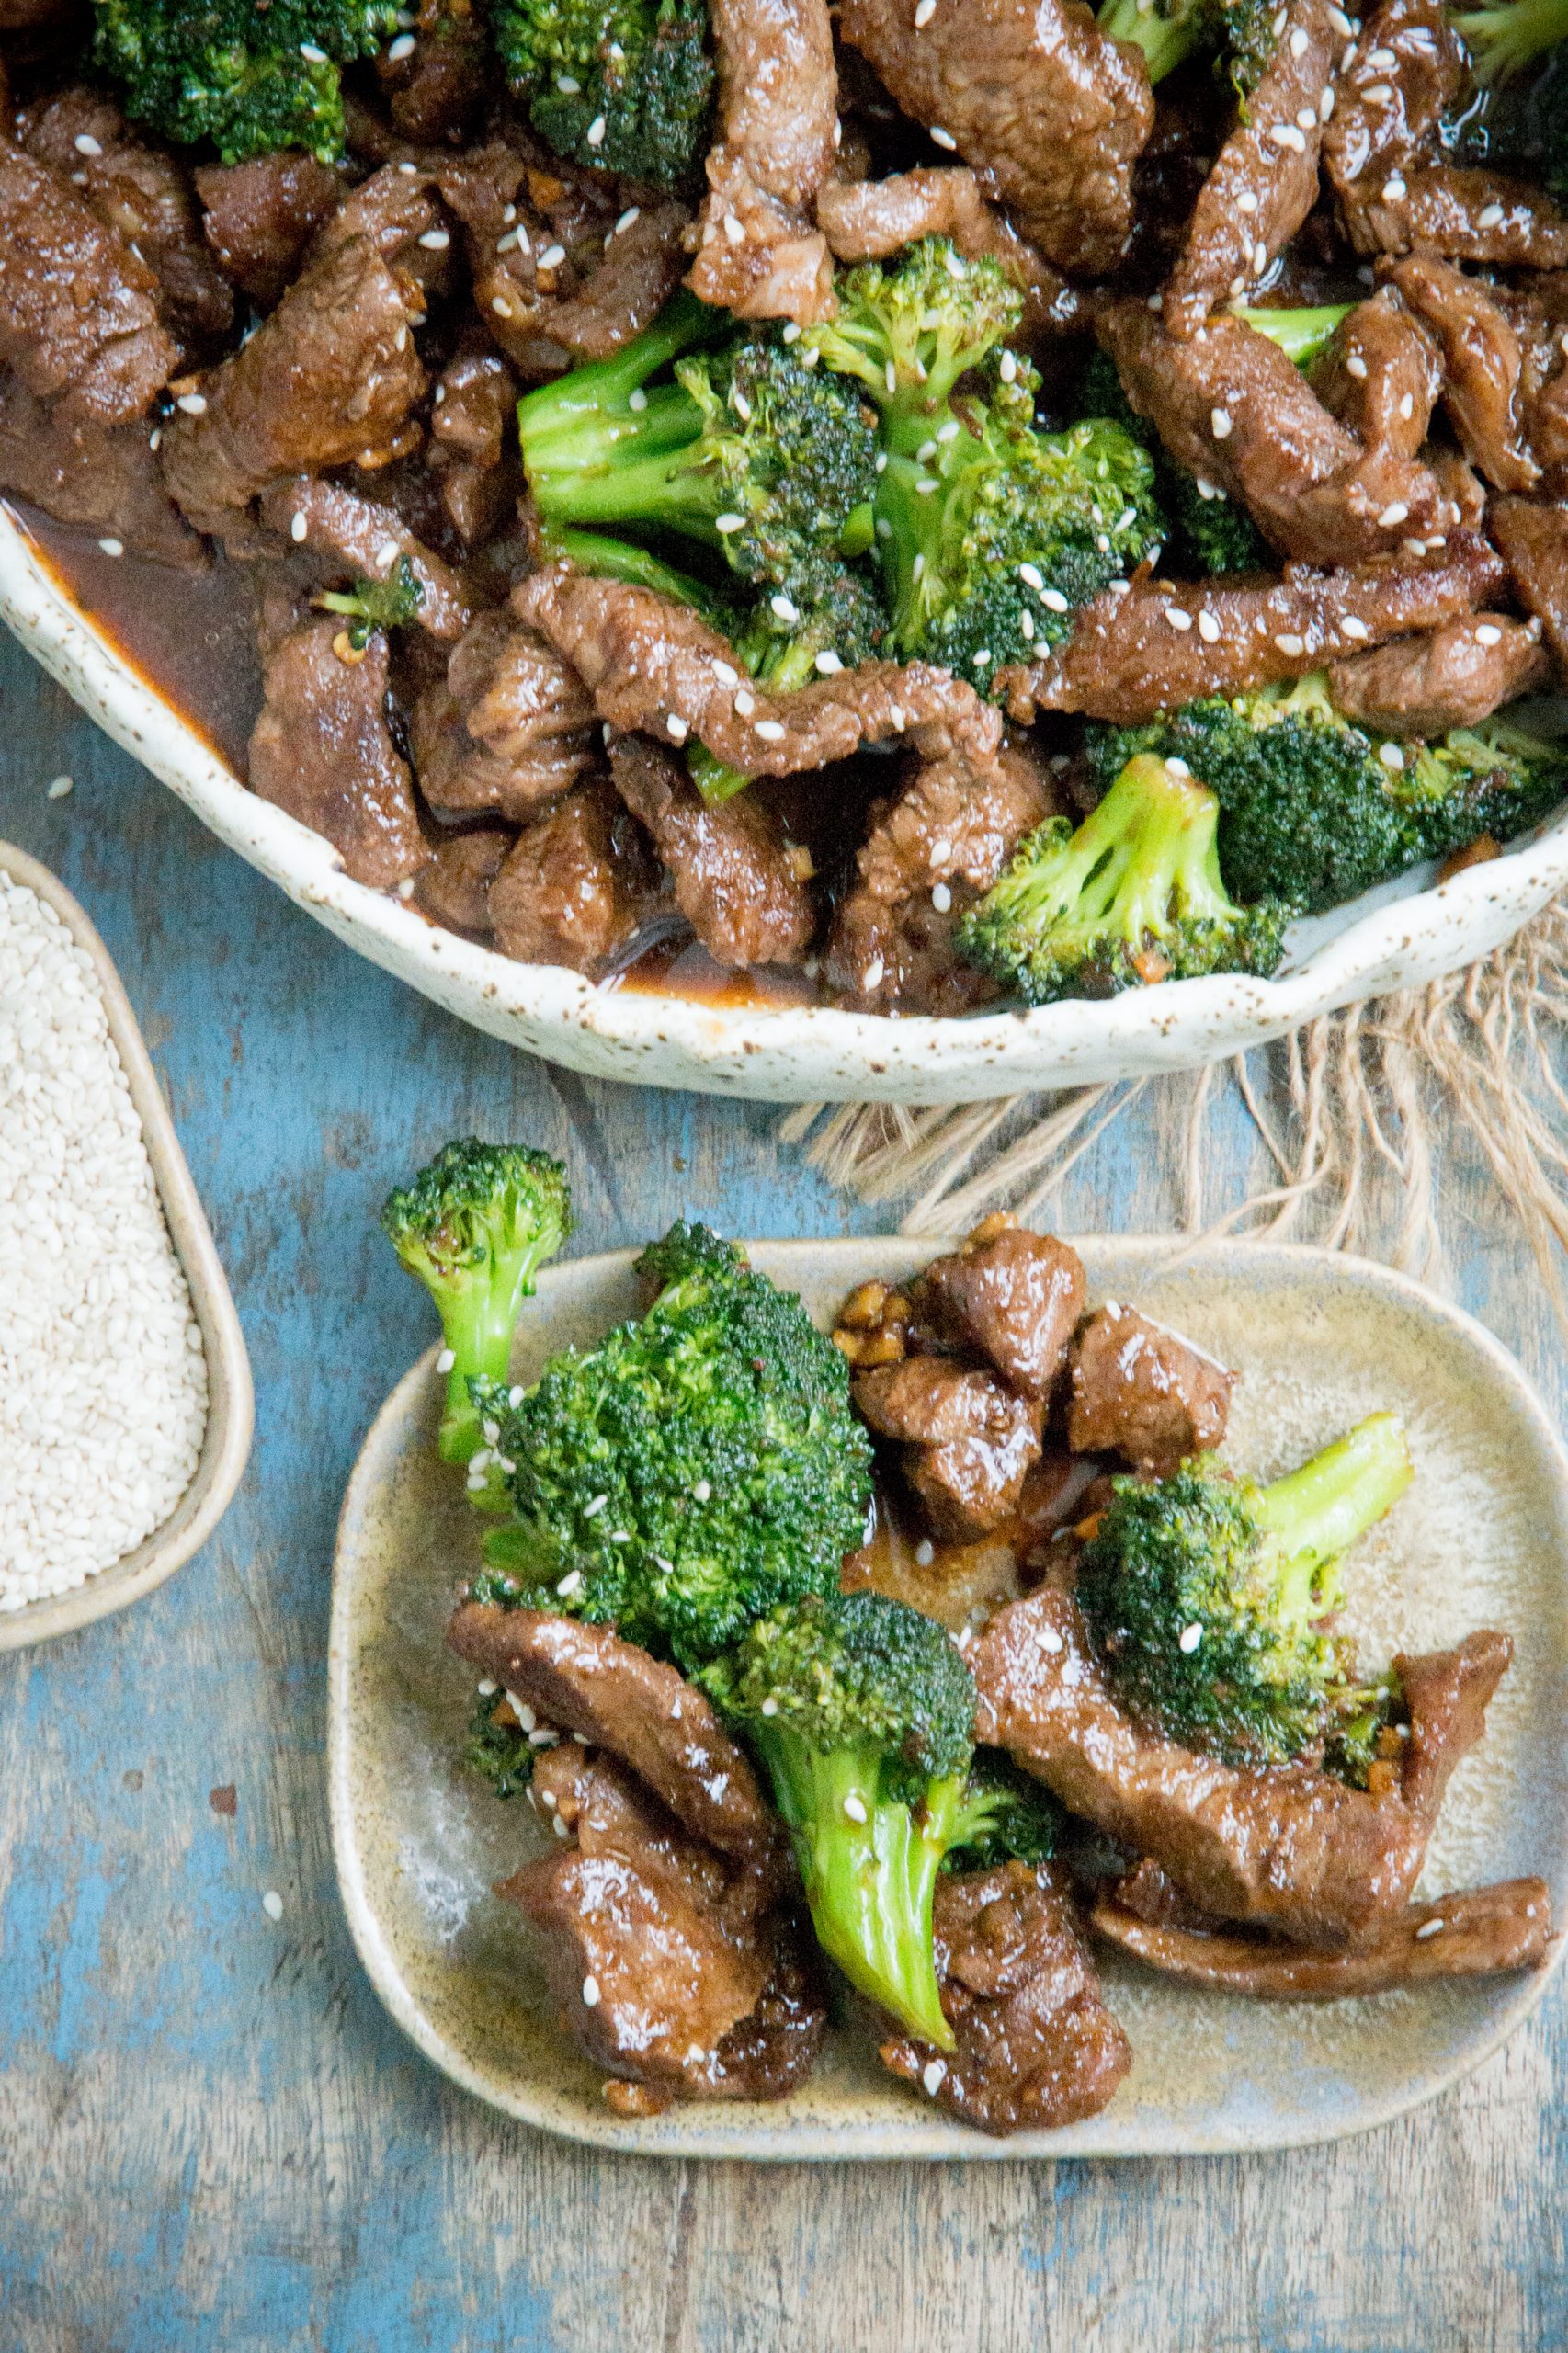 beef and broccoli served on a plate.